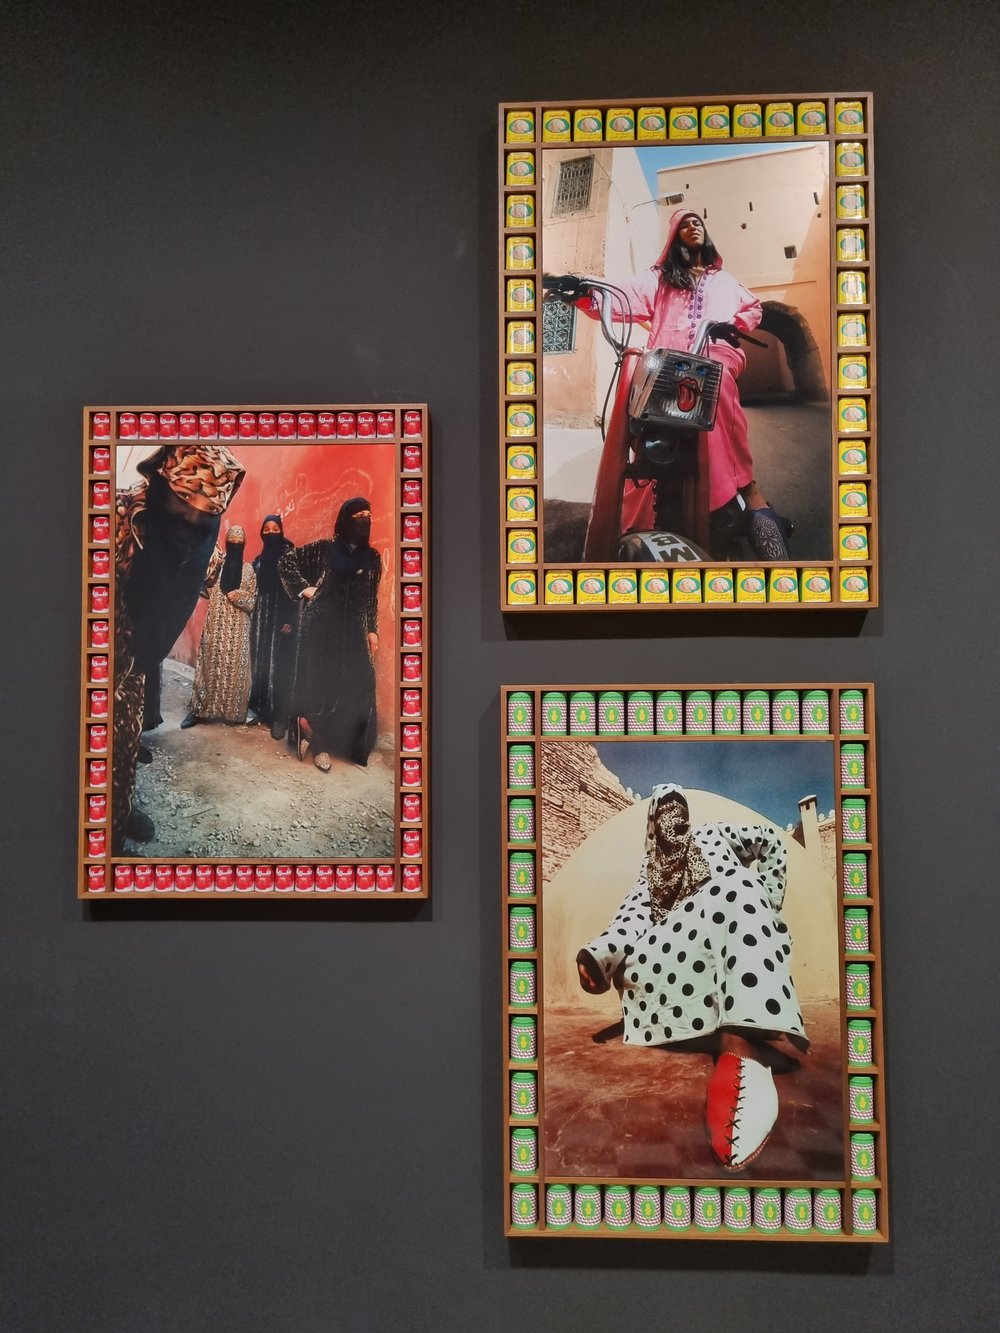 Ha Hna / Rider in Pink / White Dotted Stance, Hassan Hajjaj, 2000 - 2002